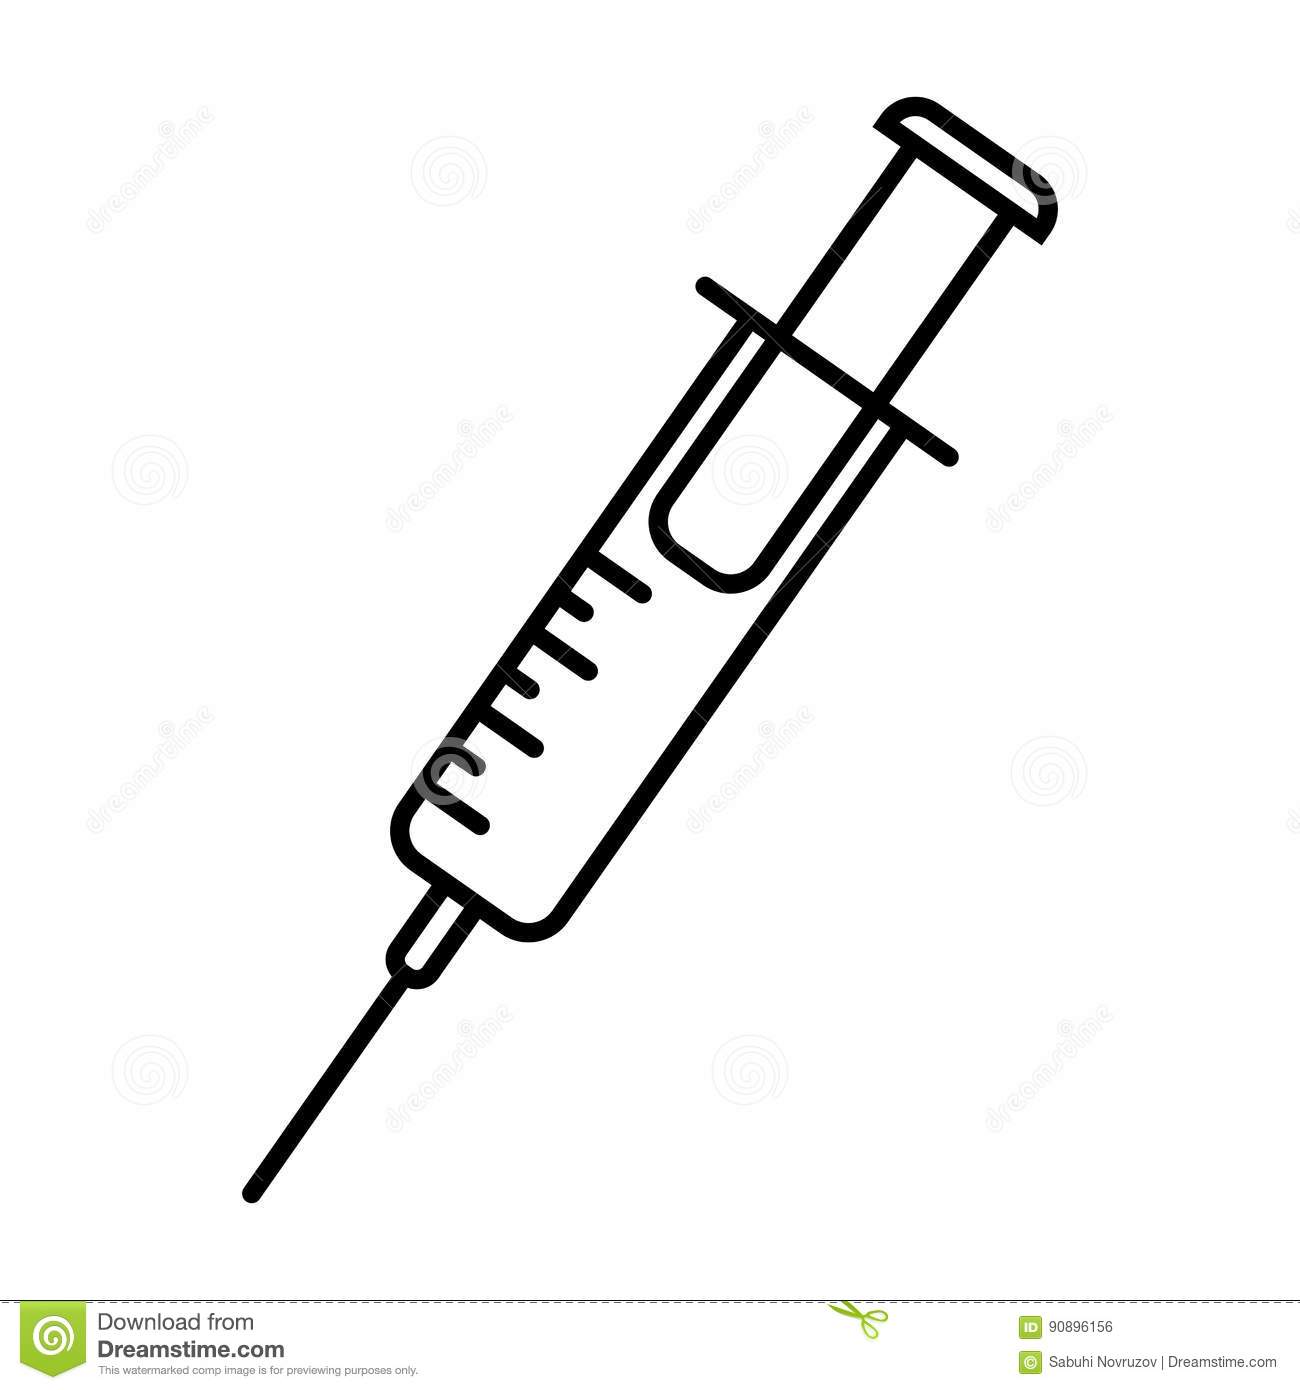 Injection clipart black and white